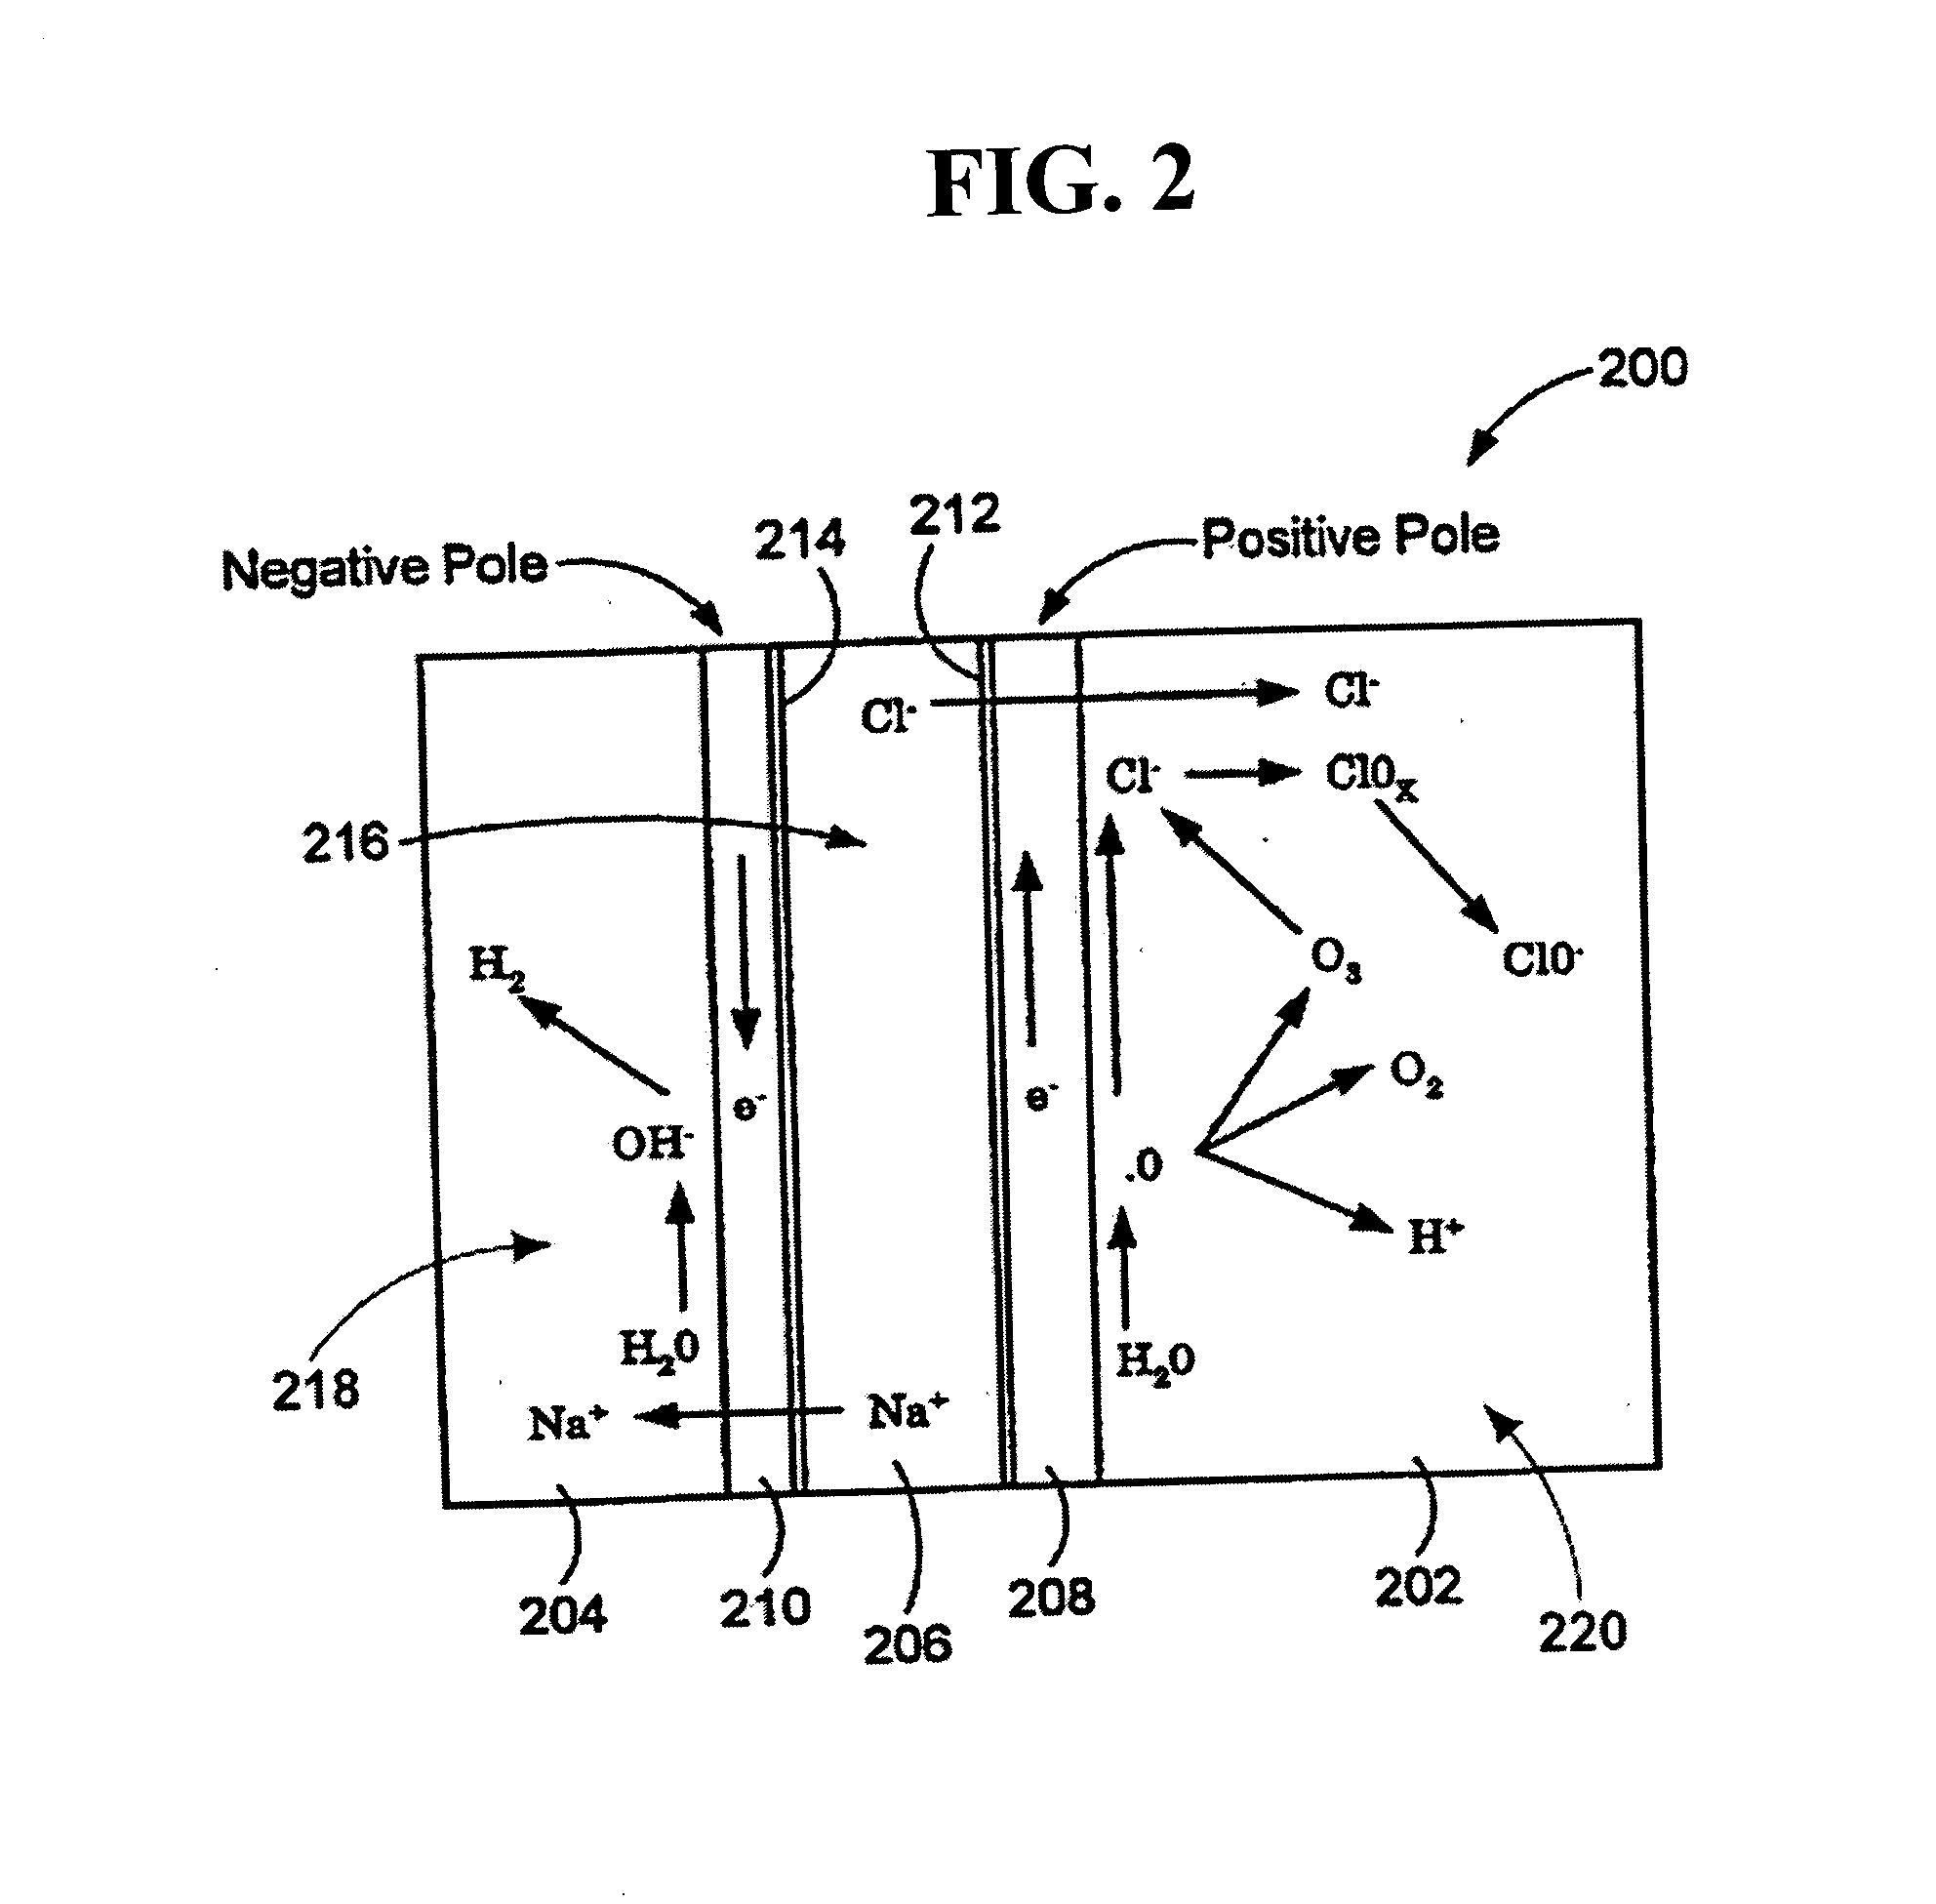 Method of treating skin ulcers using oxidative reductive potential water solution